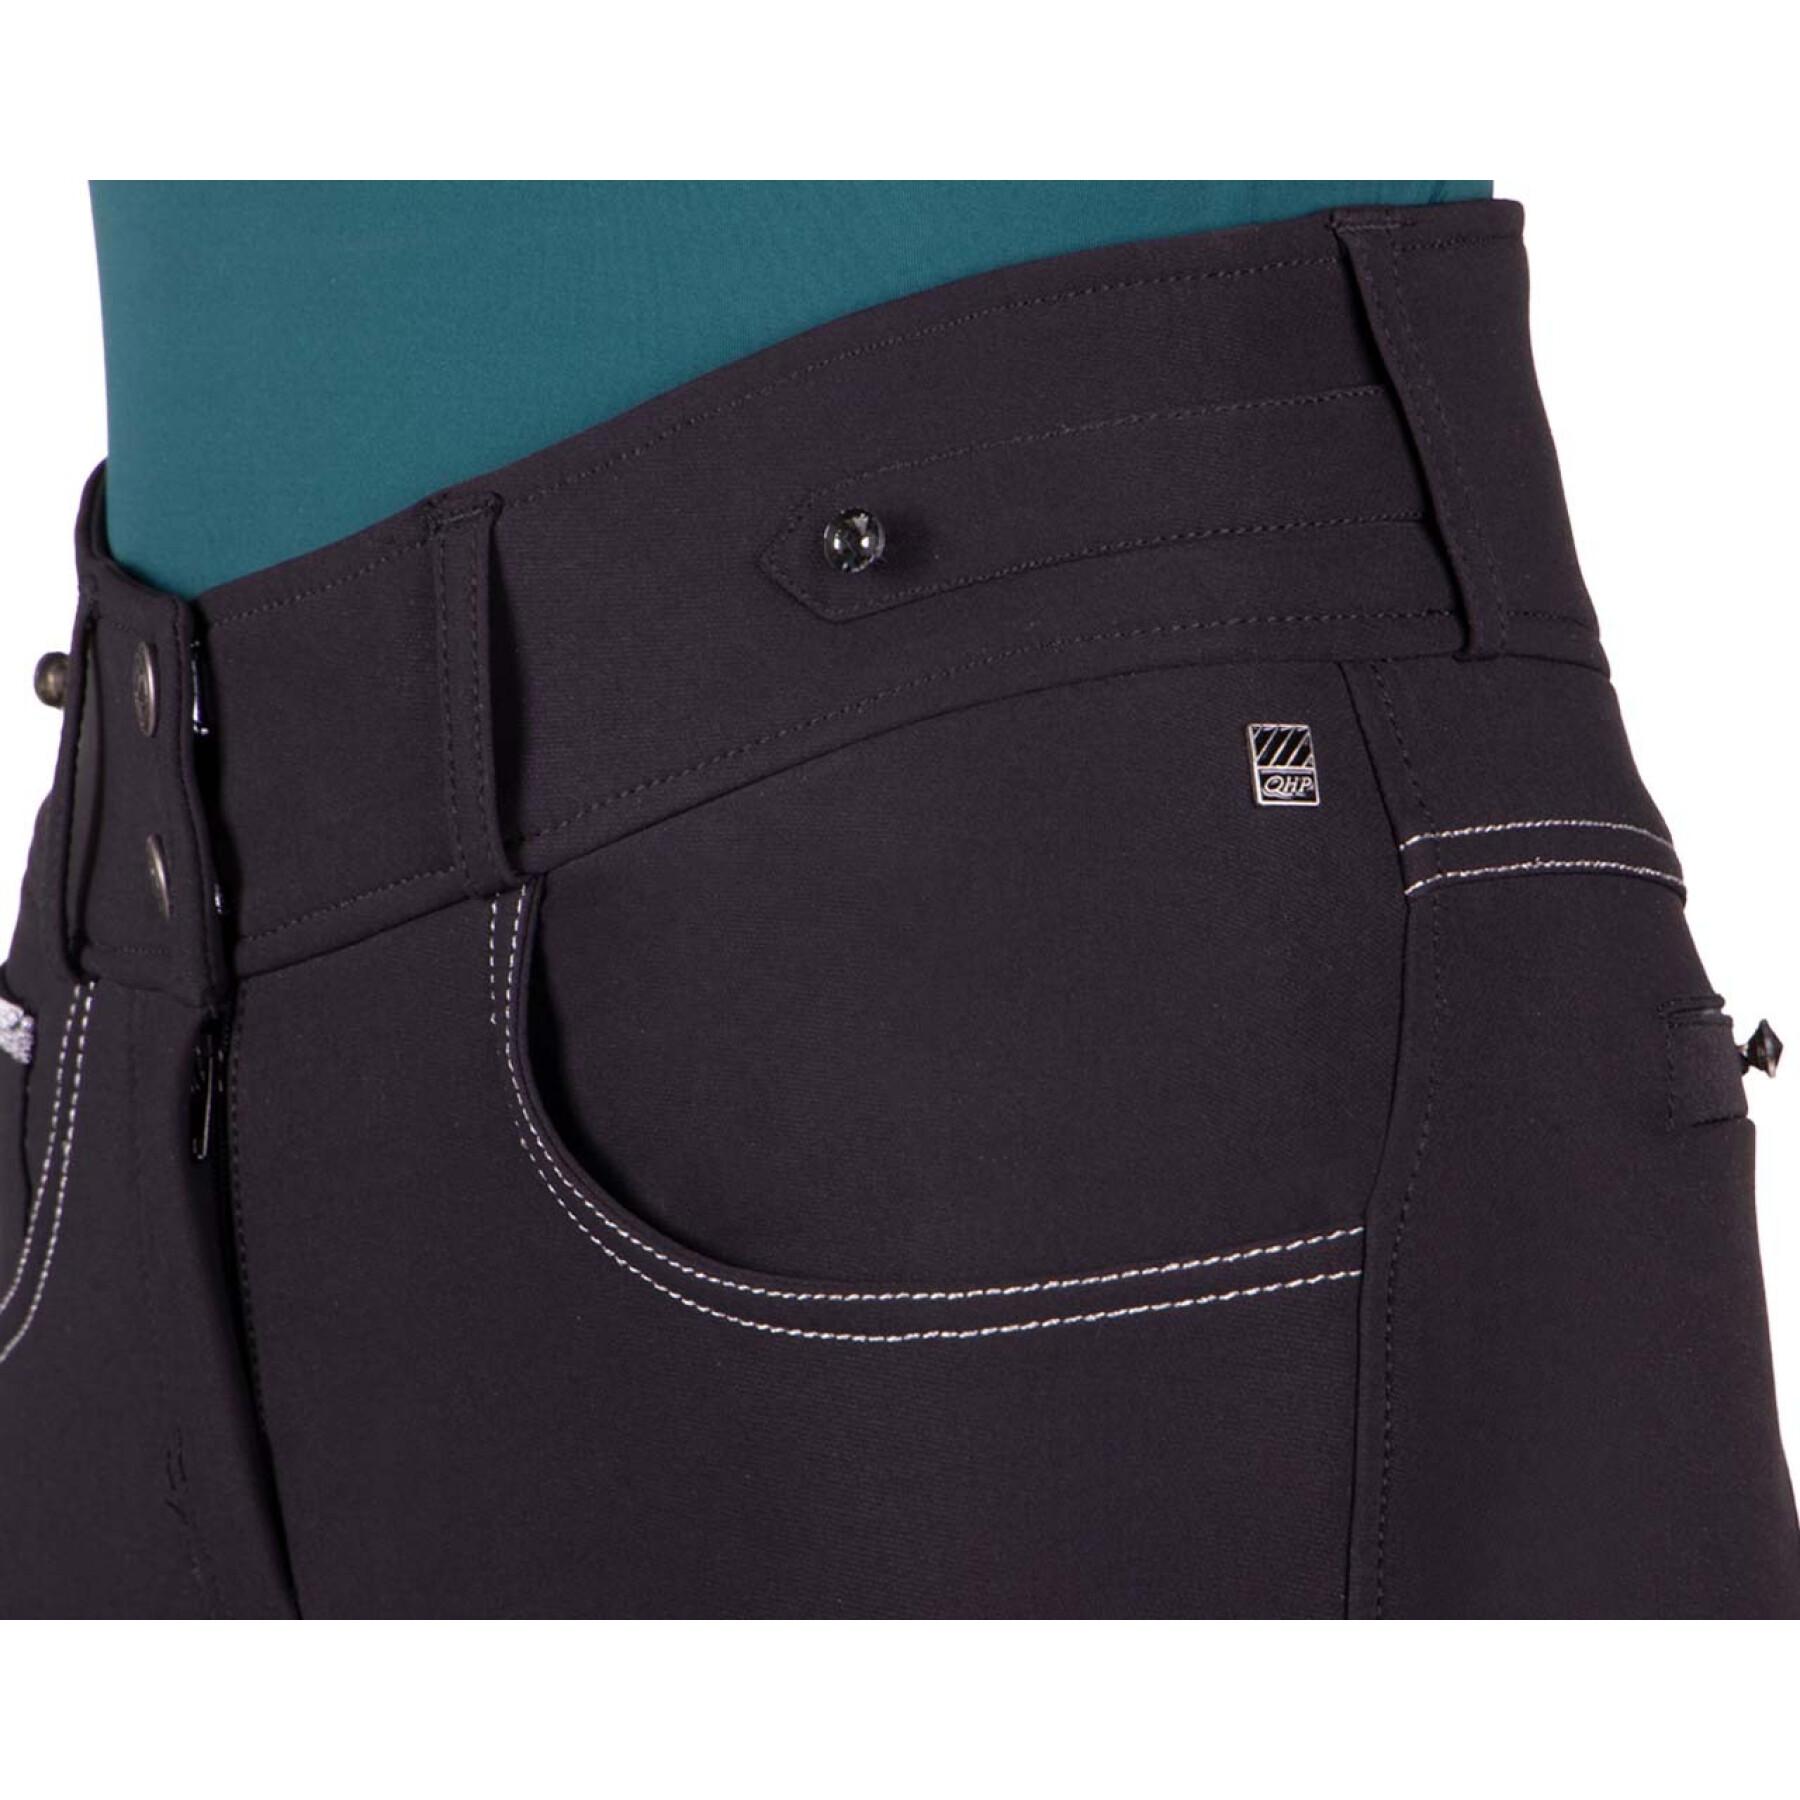 Riding pants with grip for women QHP Adalyn